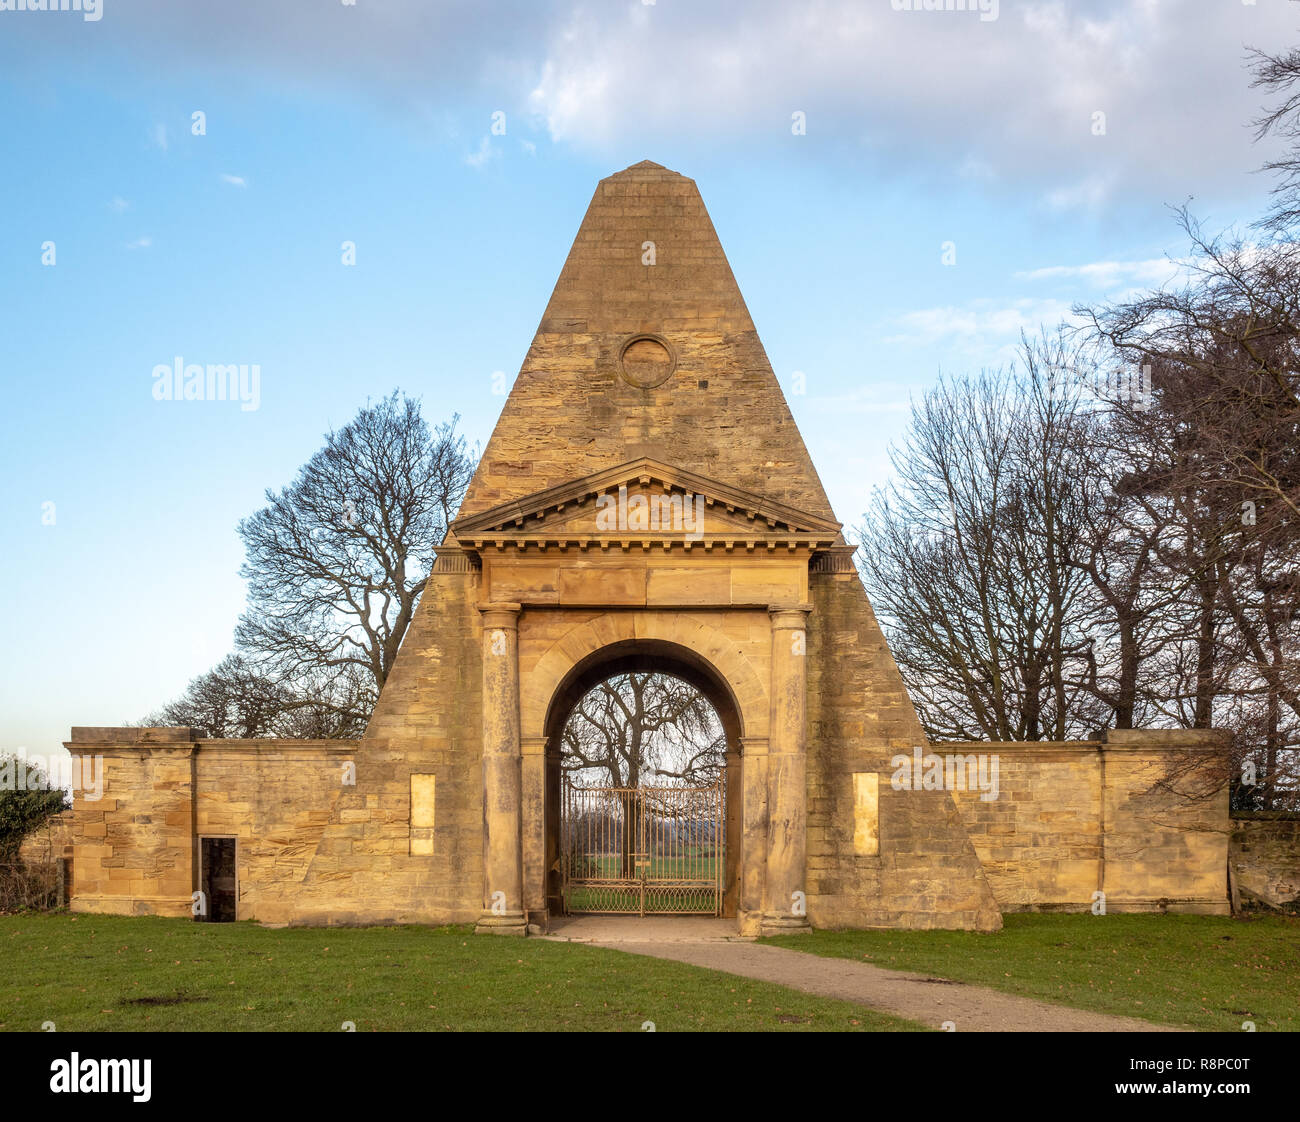 The Obelisk Lodge, Nostell Priory, West Yorkshire, UK. Stock Photo